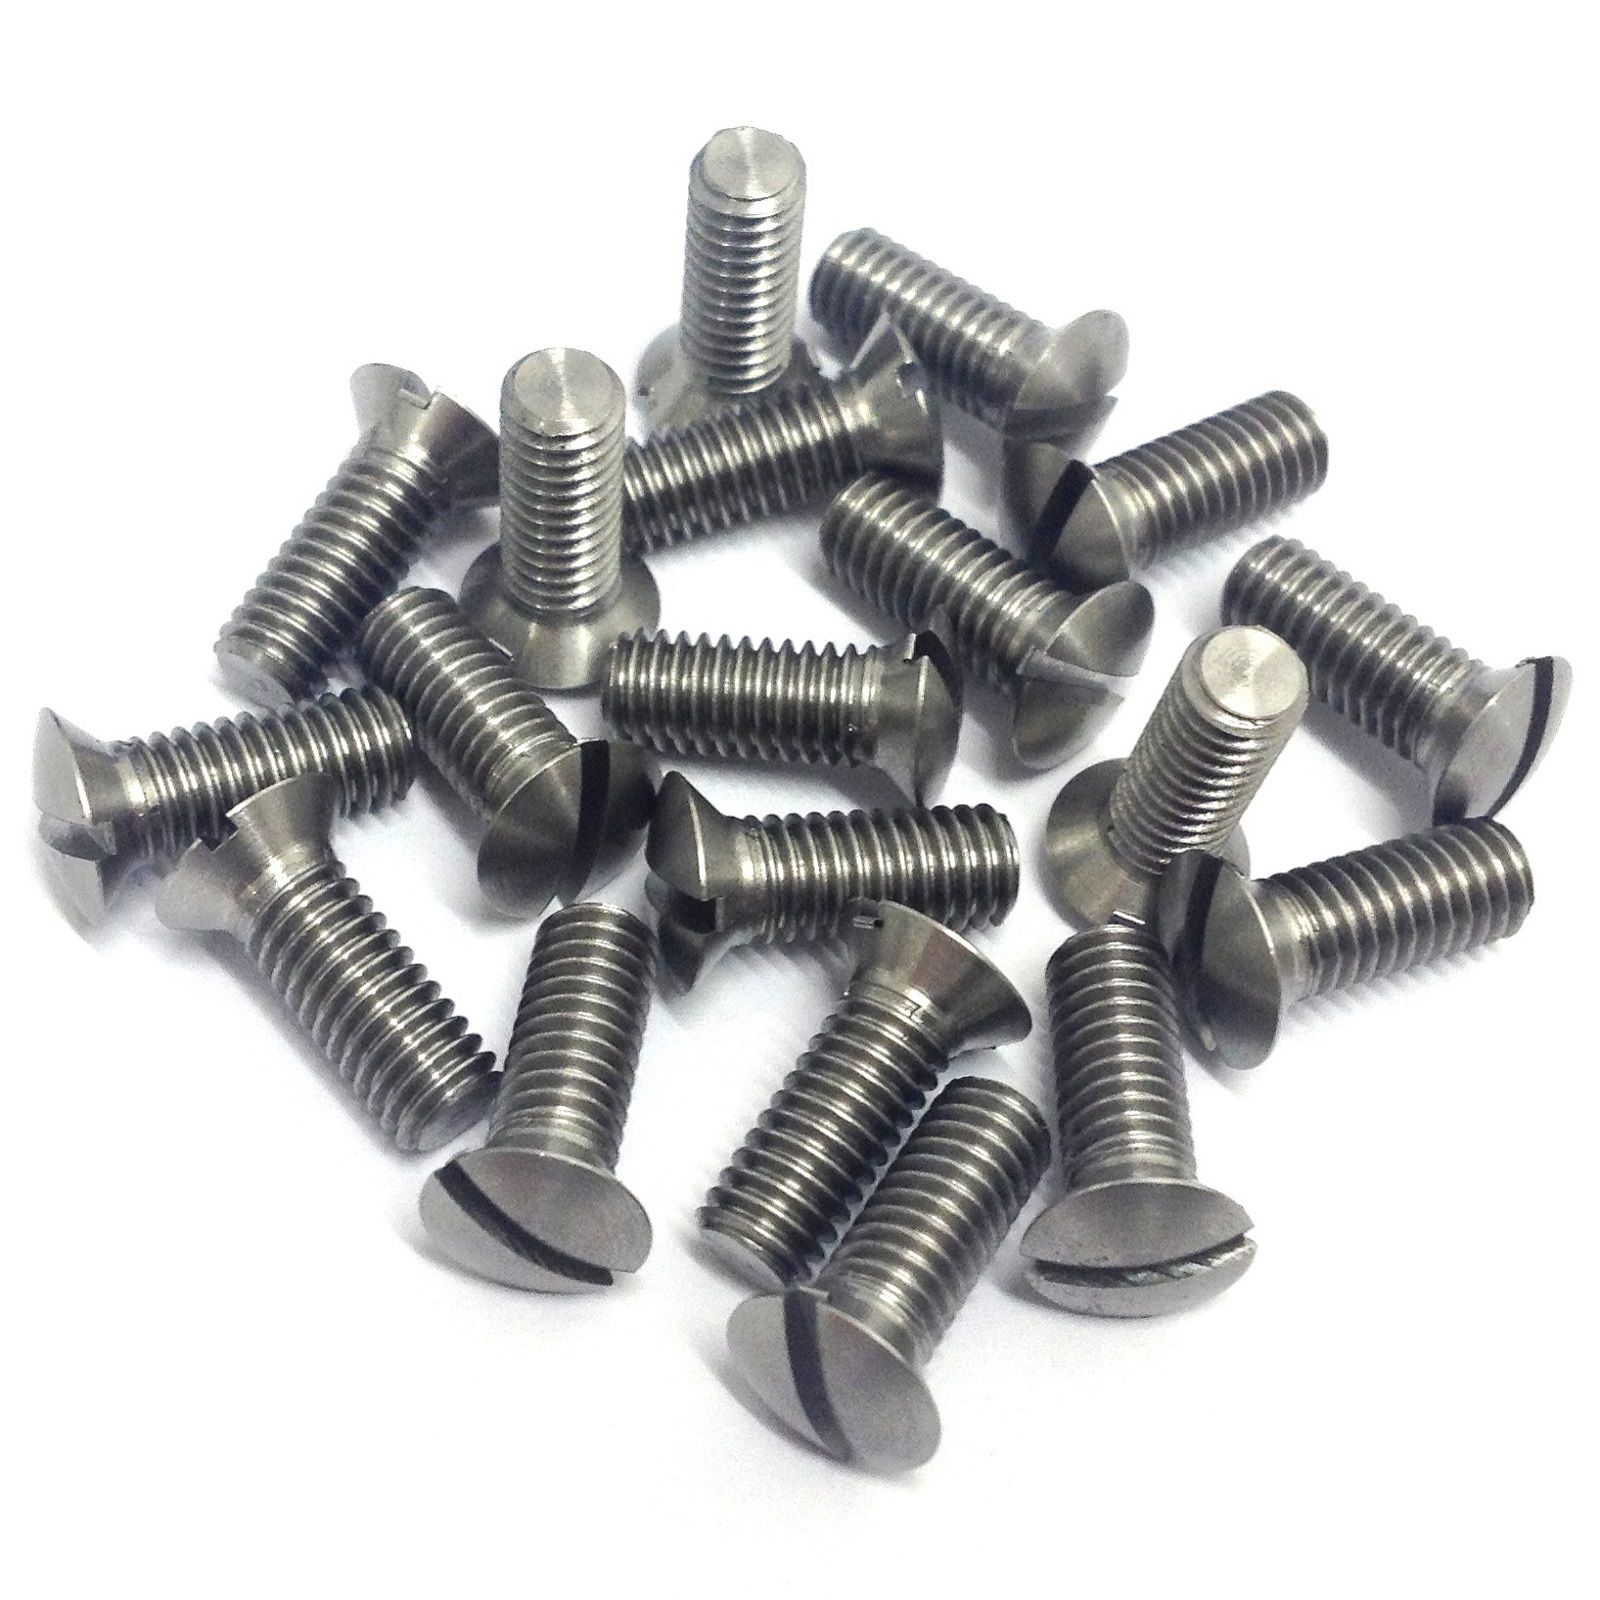 Hot Selling for Round Head Oval Neck Bolt - raised countersunk machine screw – Krui Hardware Product Co., Ltd.,